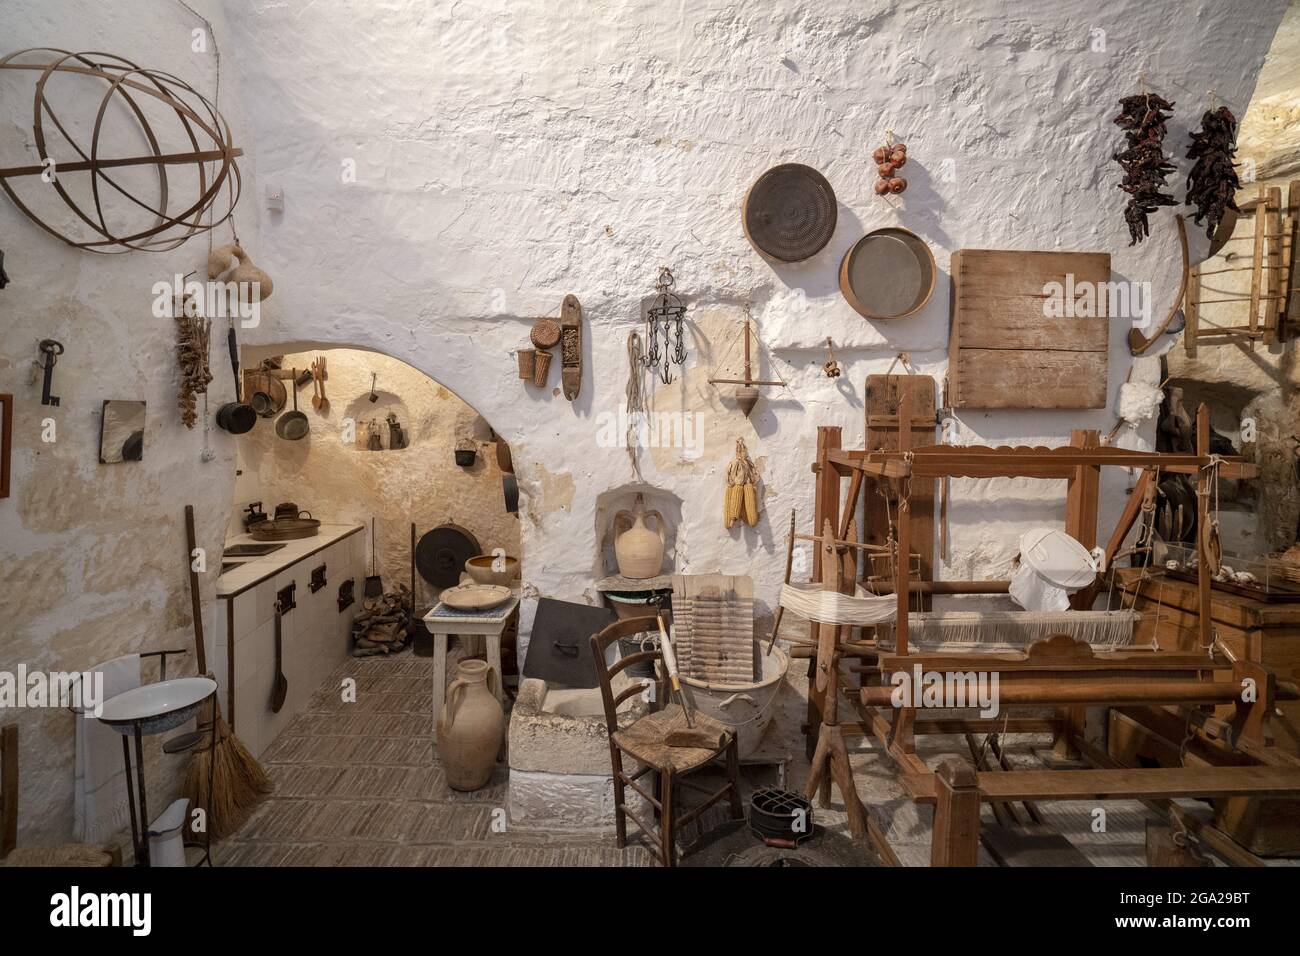 Museum about traditional life in the Sassi of Matera, Italy; Matera, Basilicata, Italy Stock Photo